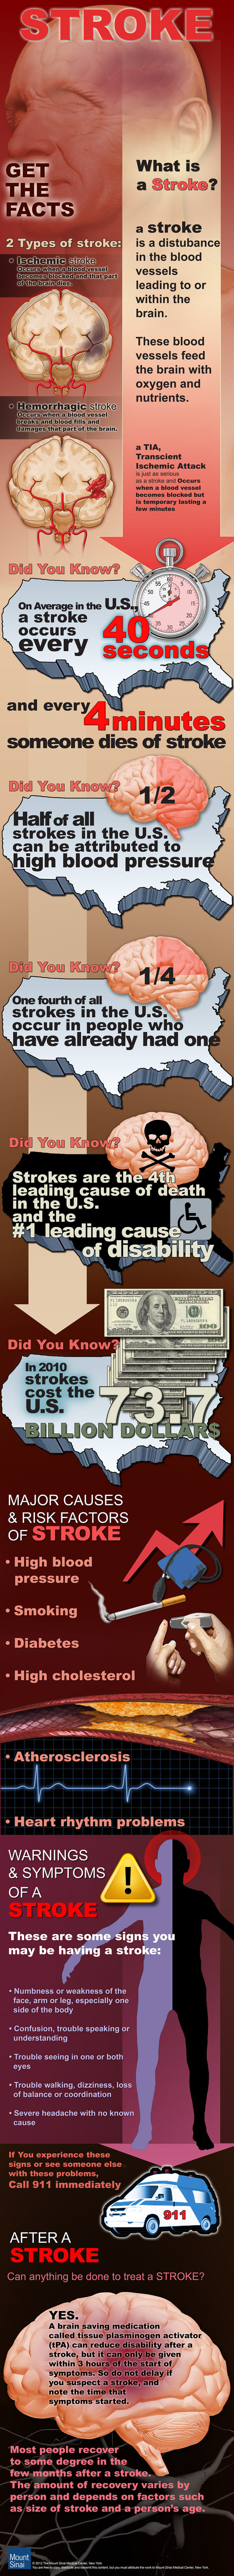 get-the-facts-on-stroke